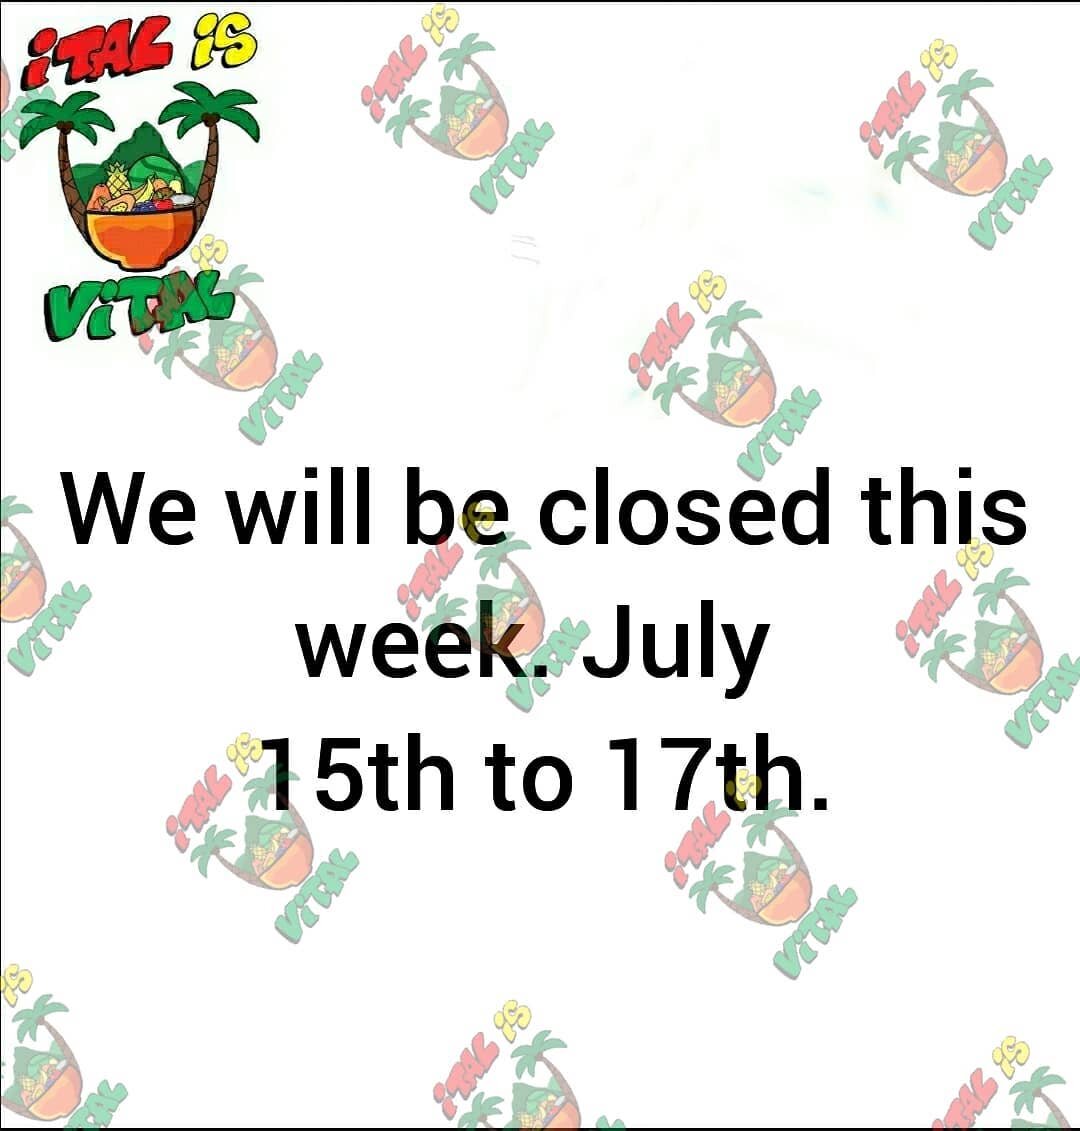 Taking the week off. Catch us next week when we reopen.